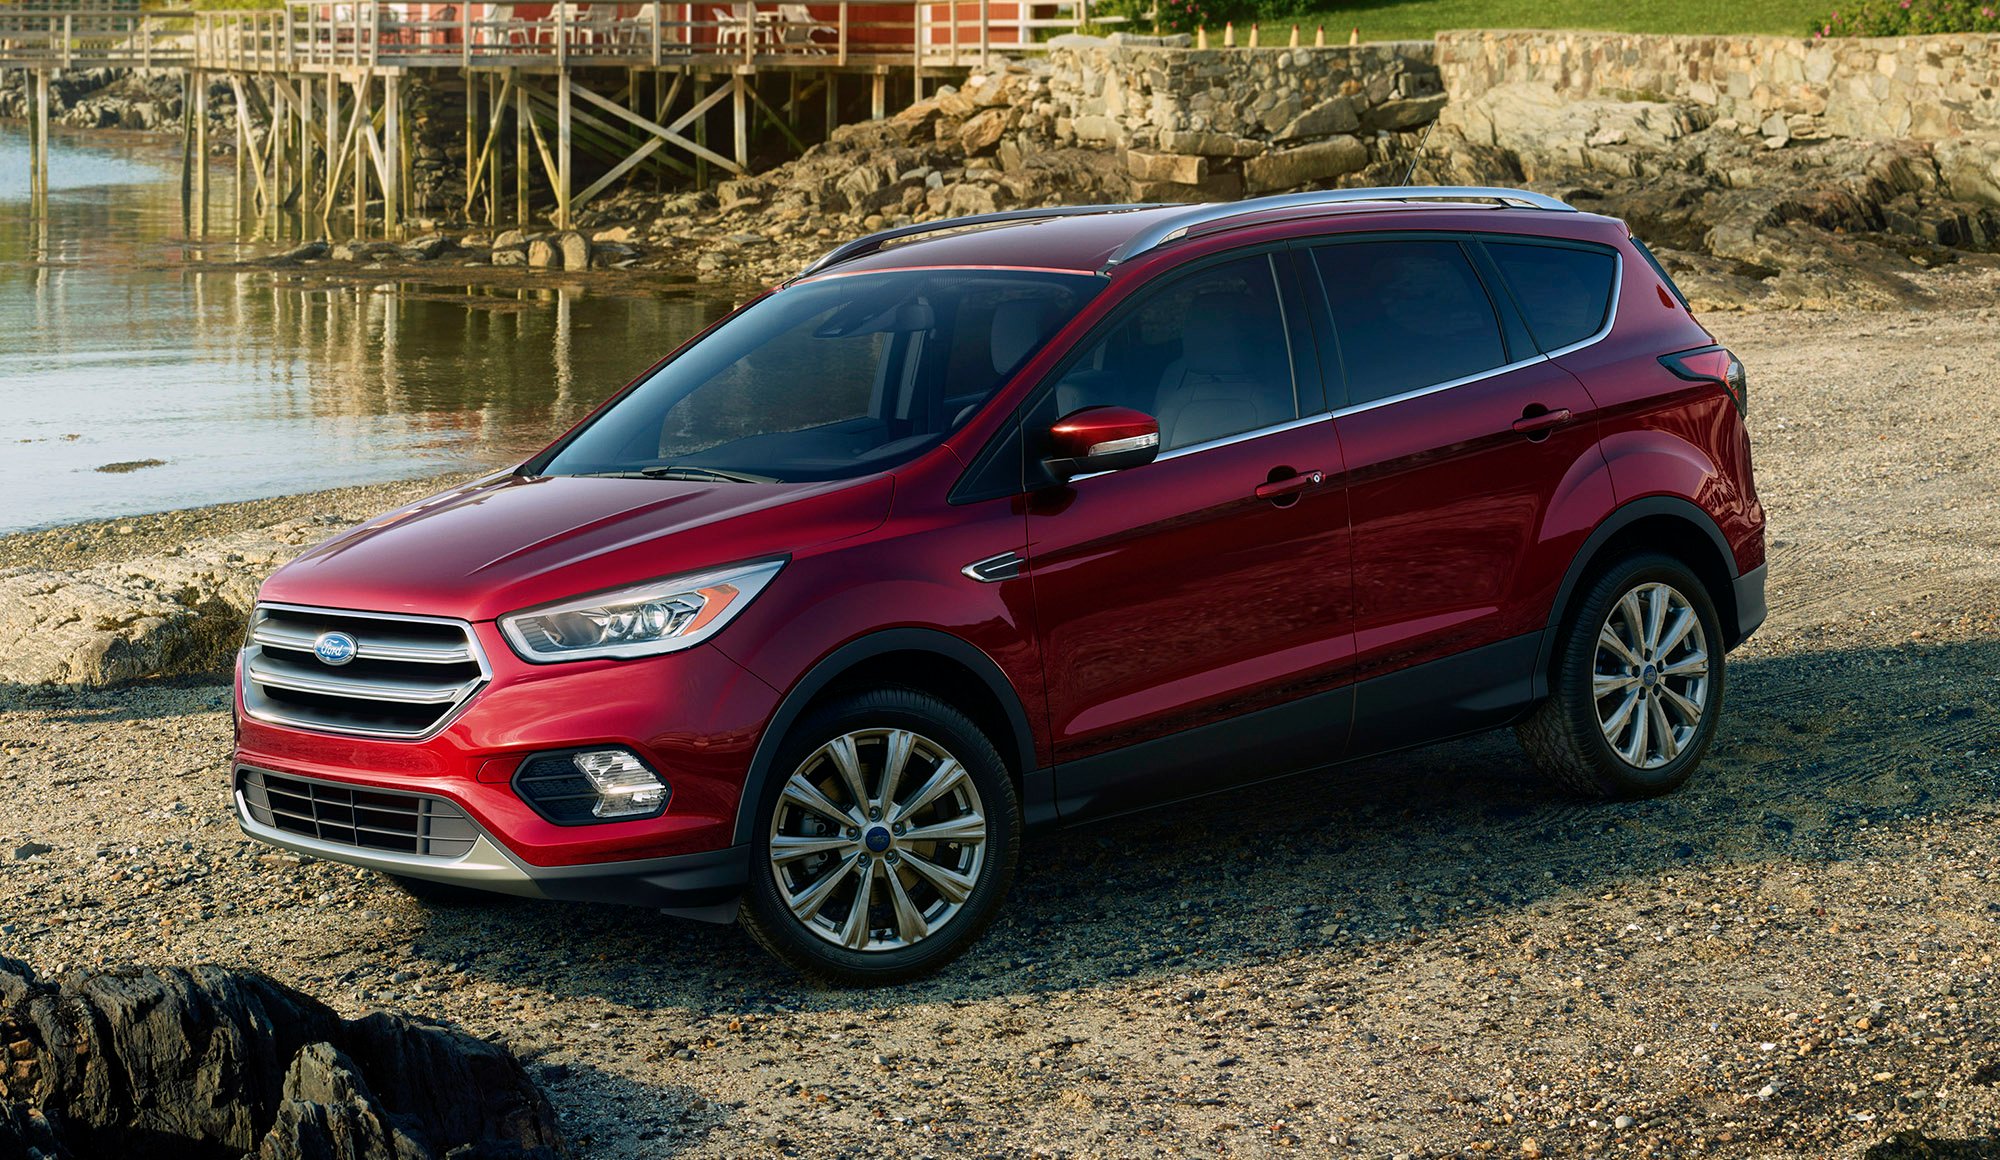 2017 Ford Kuga revealed as facelifted Escape: New looks ... car fuse box 2014 